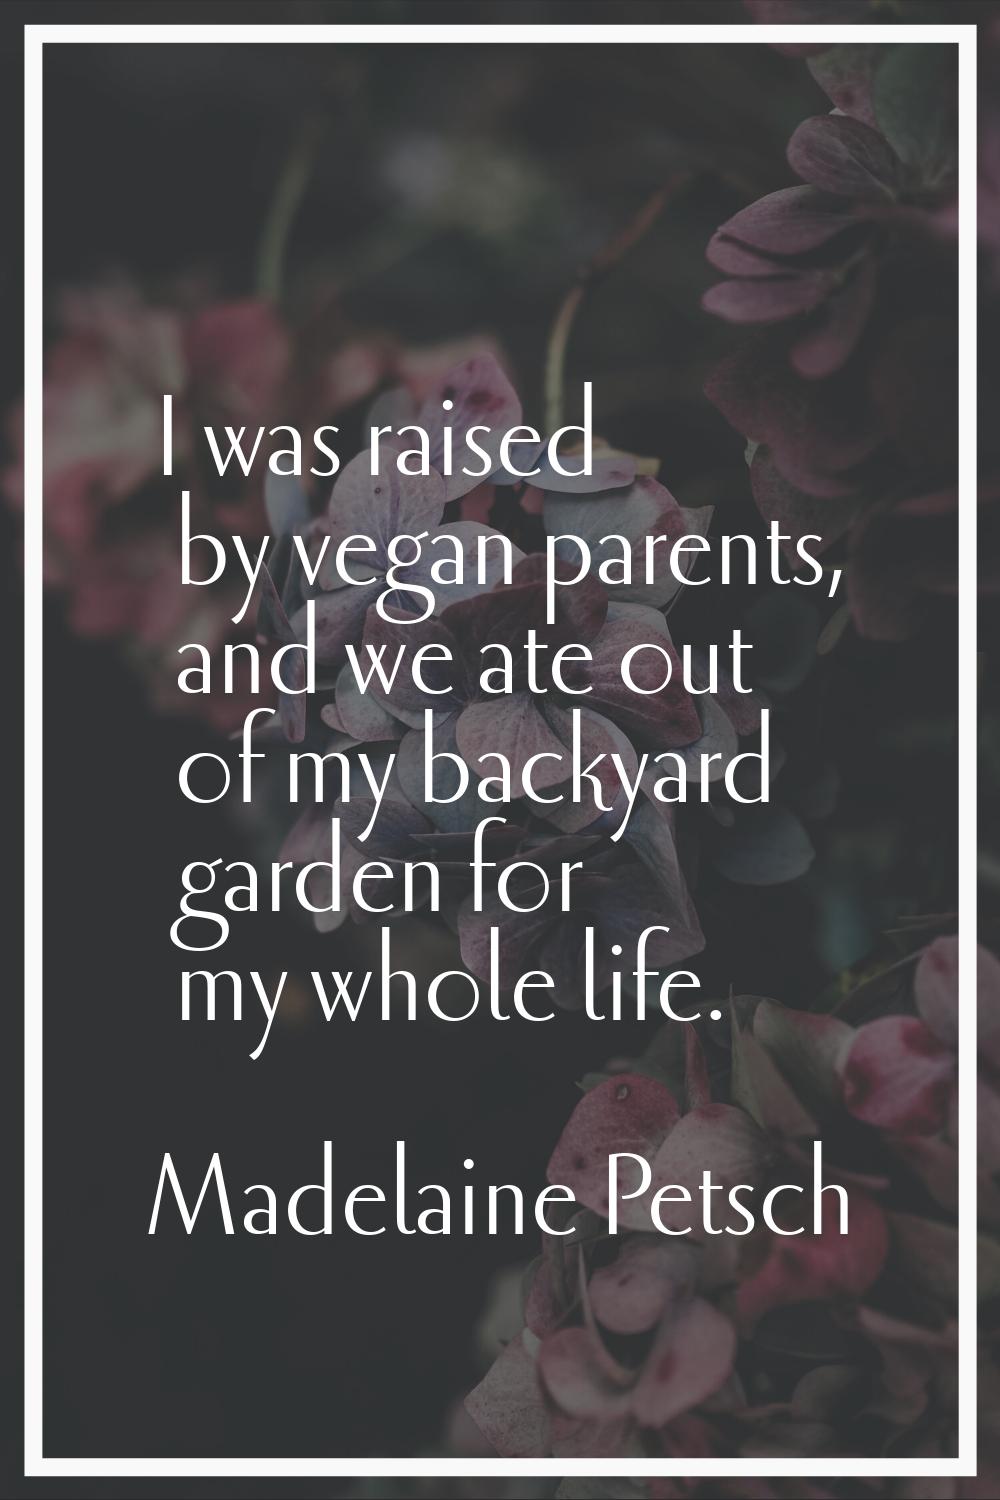 I was raised by vegan parents, and we ate out of my backyard garden for my whole life.